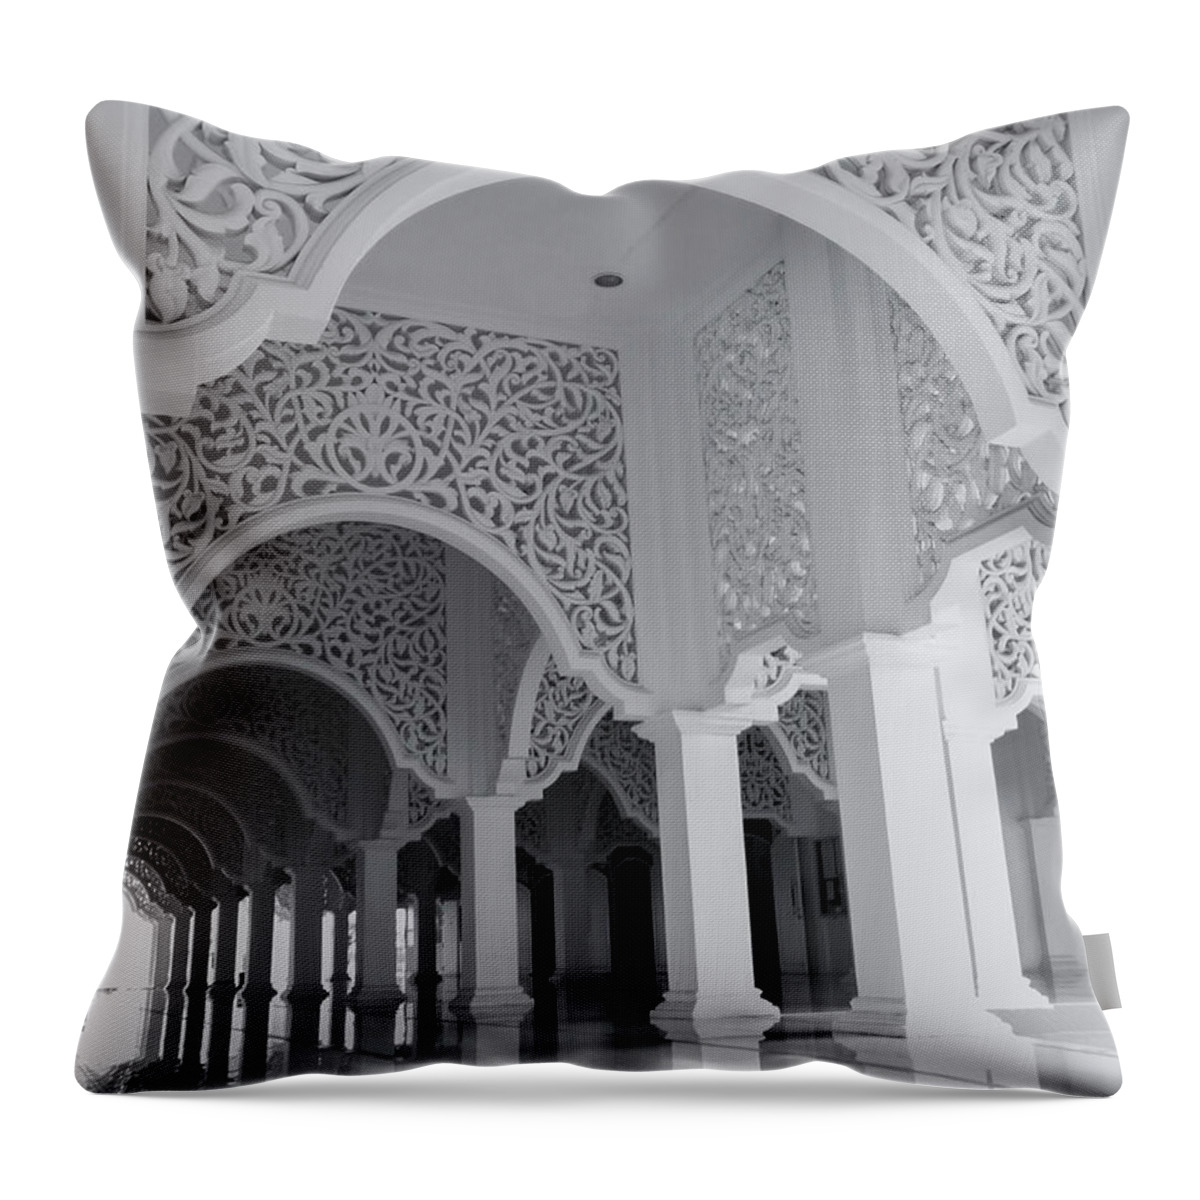 Tranquility Throw Pillow featuring the photograph Islamic Architecture by Ahmad Faizal Yahya